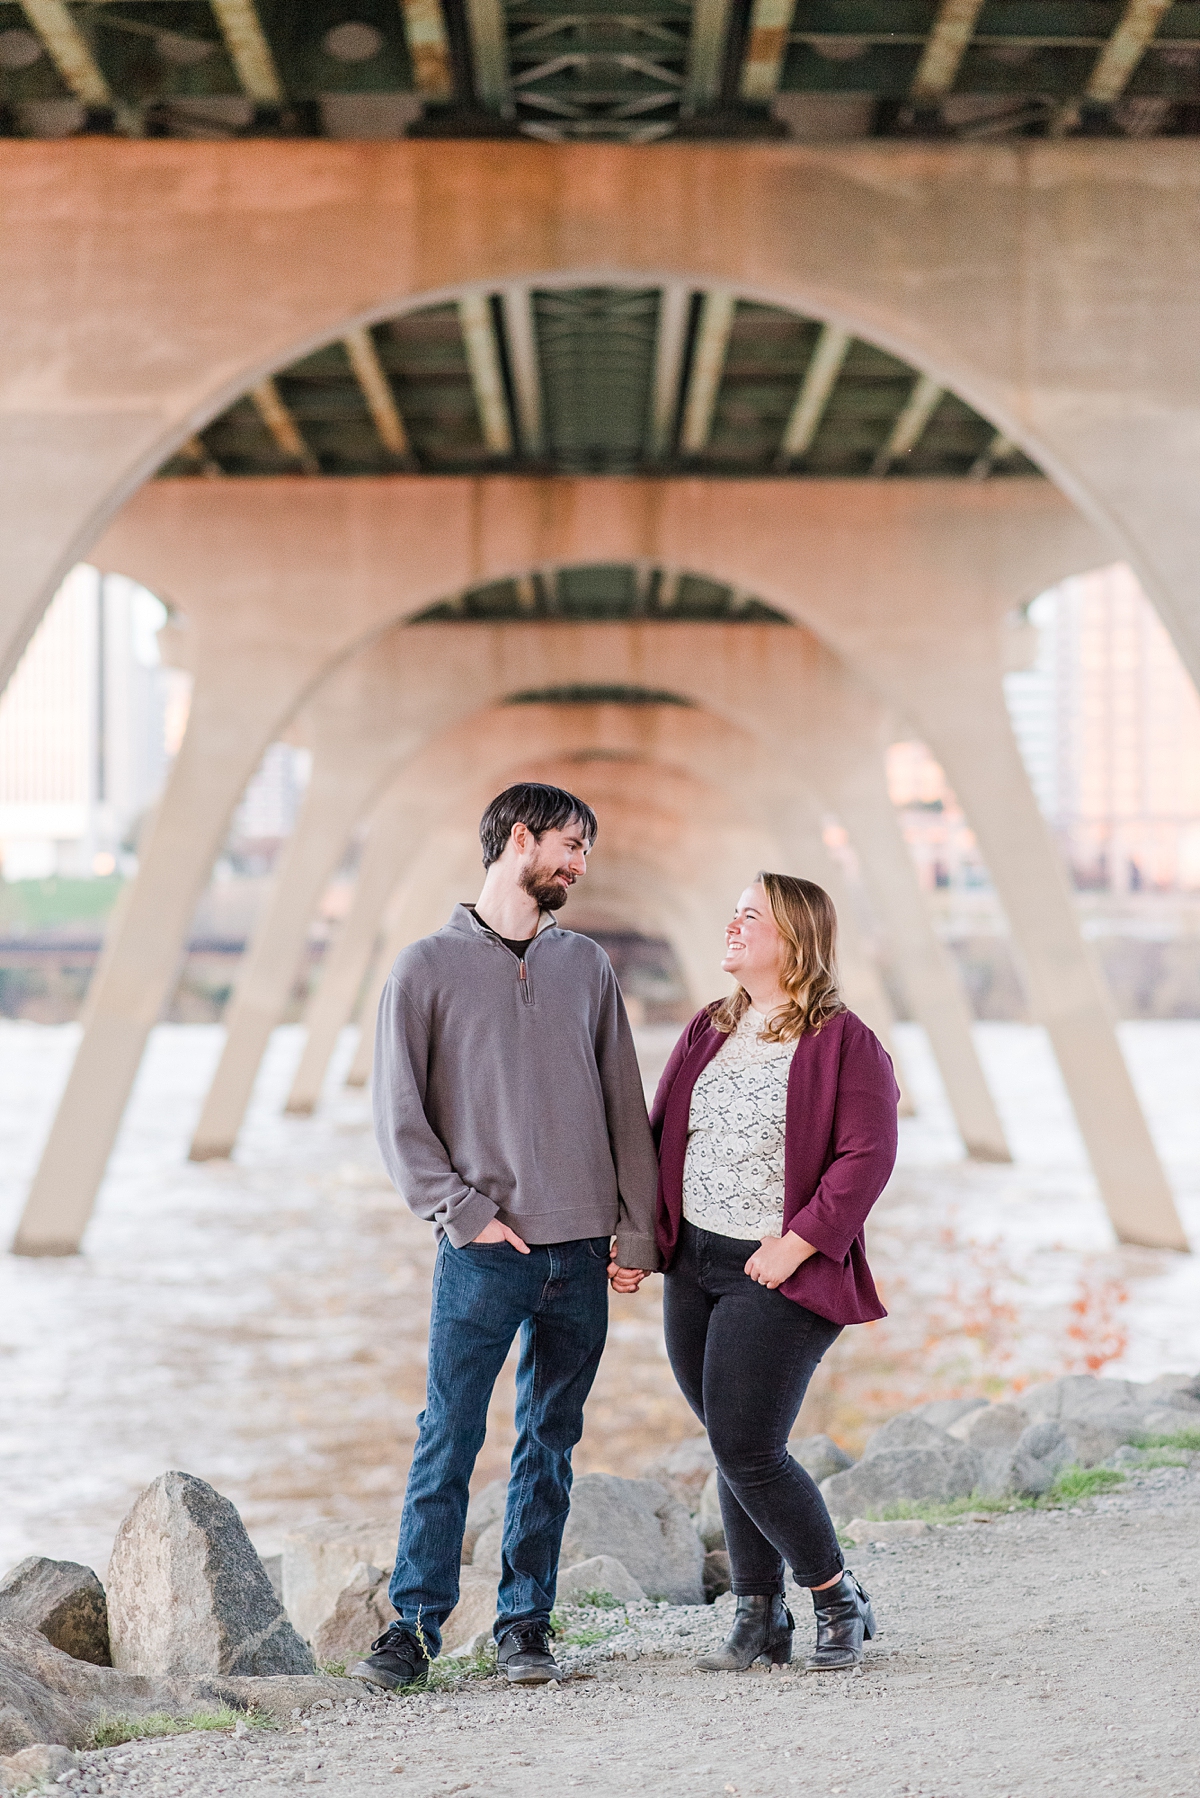 Downtown Richmond James River Engagement Session at the Manchester Climbing Wall Access. Engagement Photography by Richmond Wedding Photographer Kailey Brianne Photographer. 